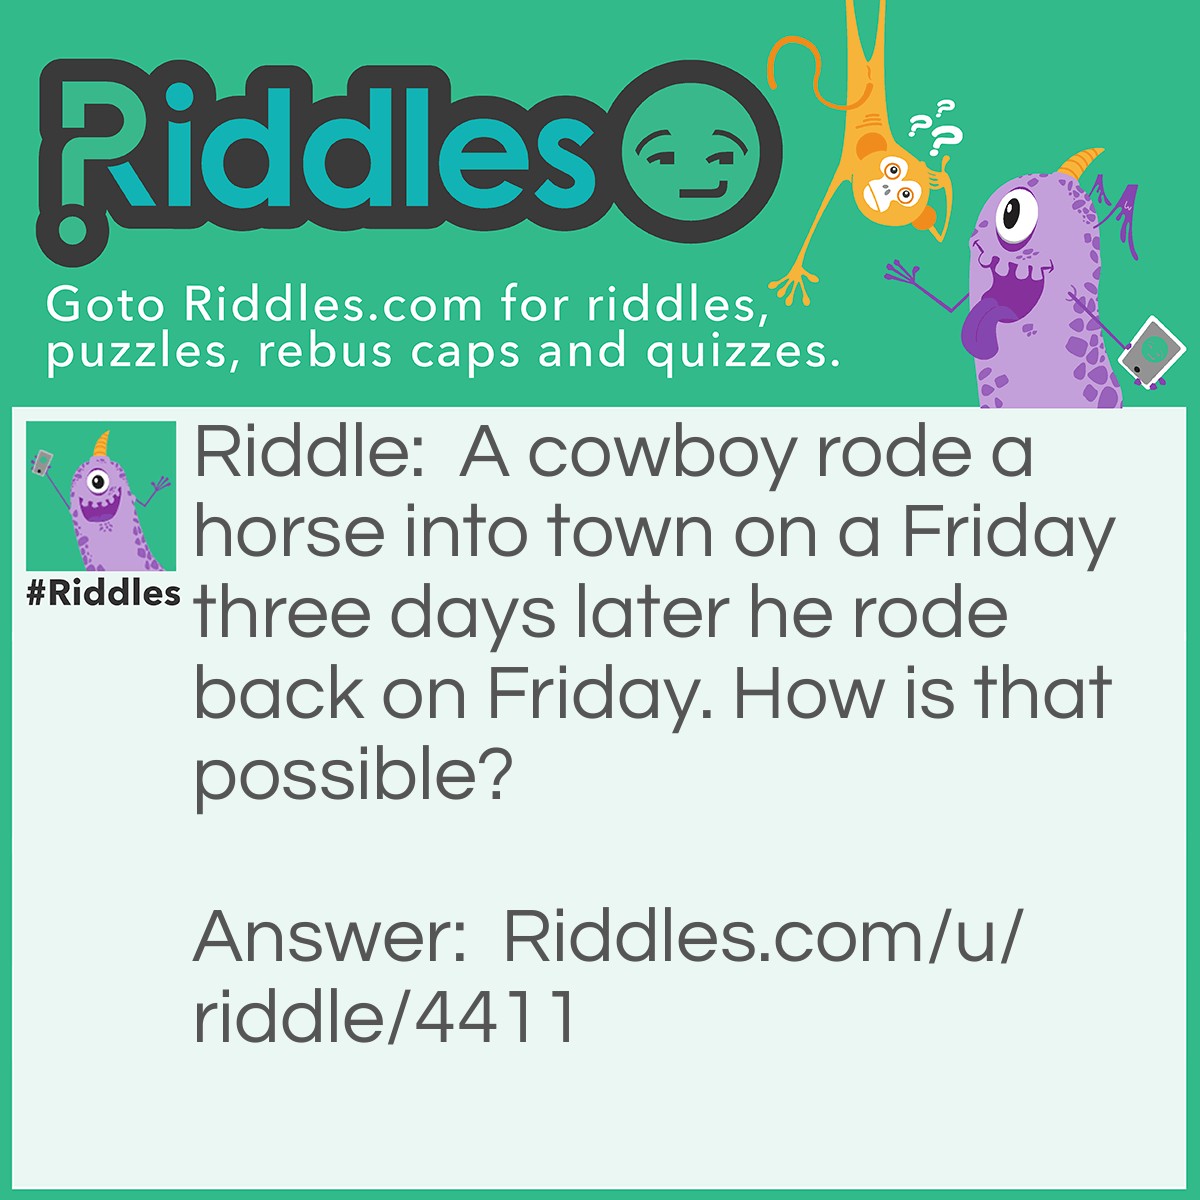 Riddle: A cowboy rode a horse into town on a Friday three days later he rode back on Friday. How is that possible? Answer: The horses name is Friday.